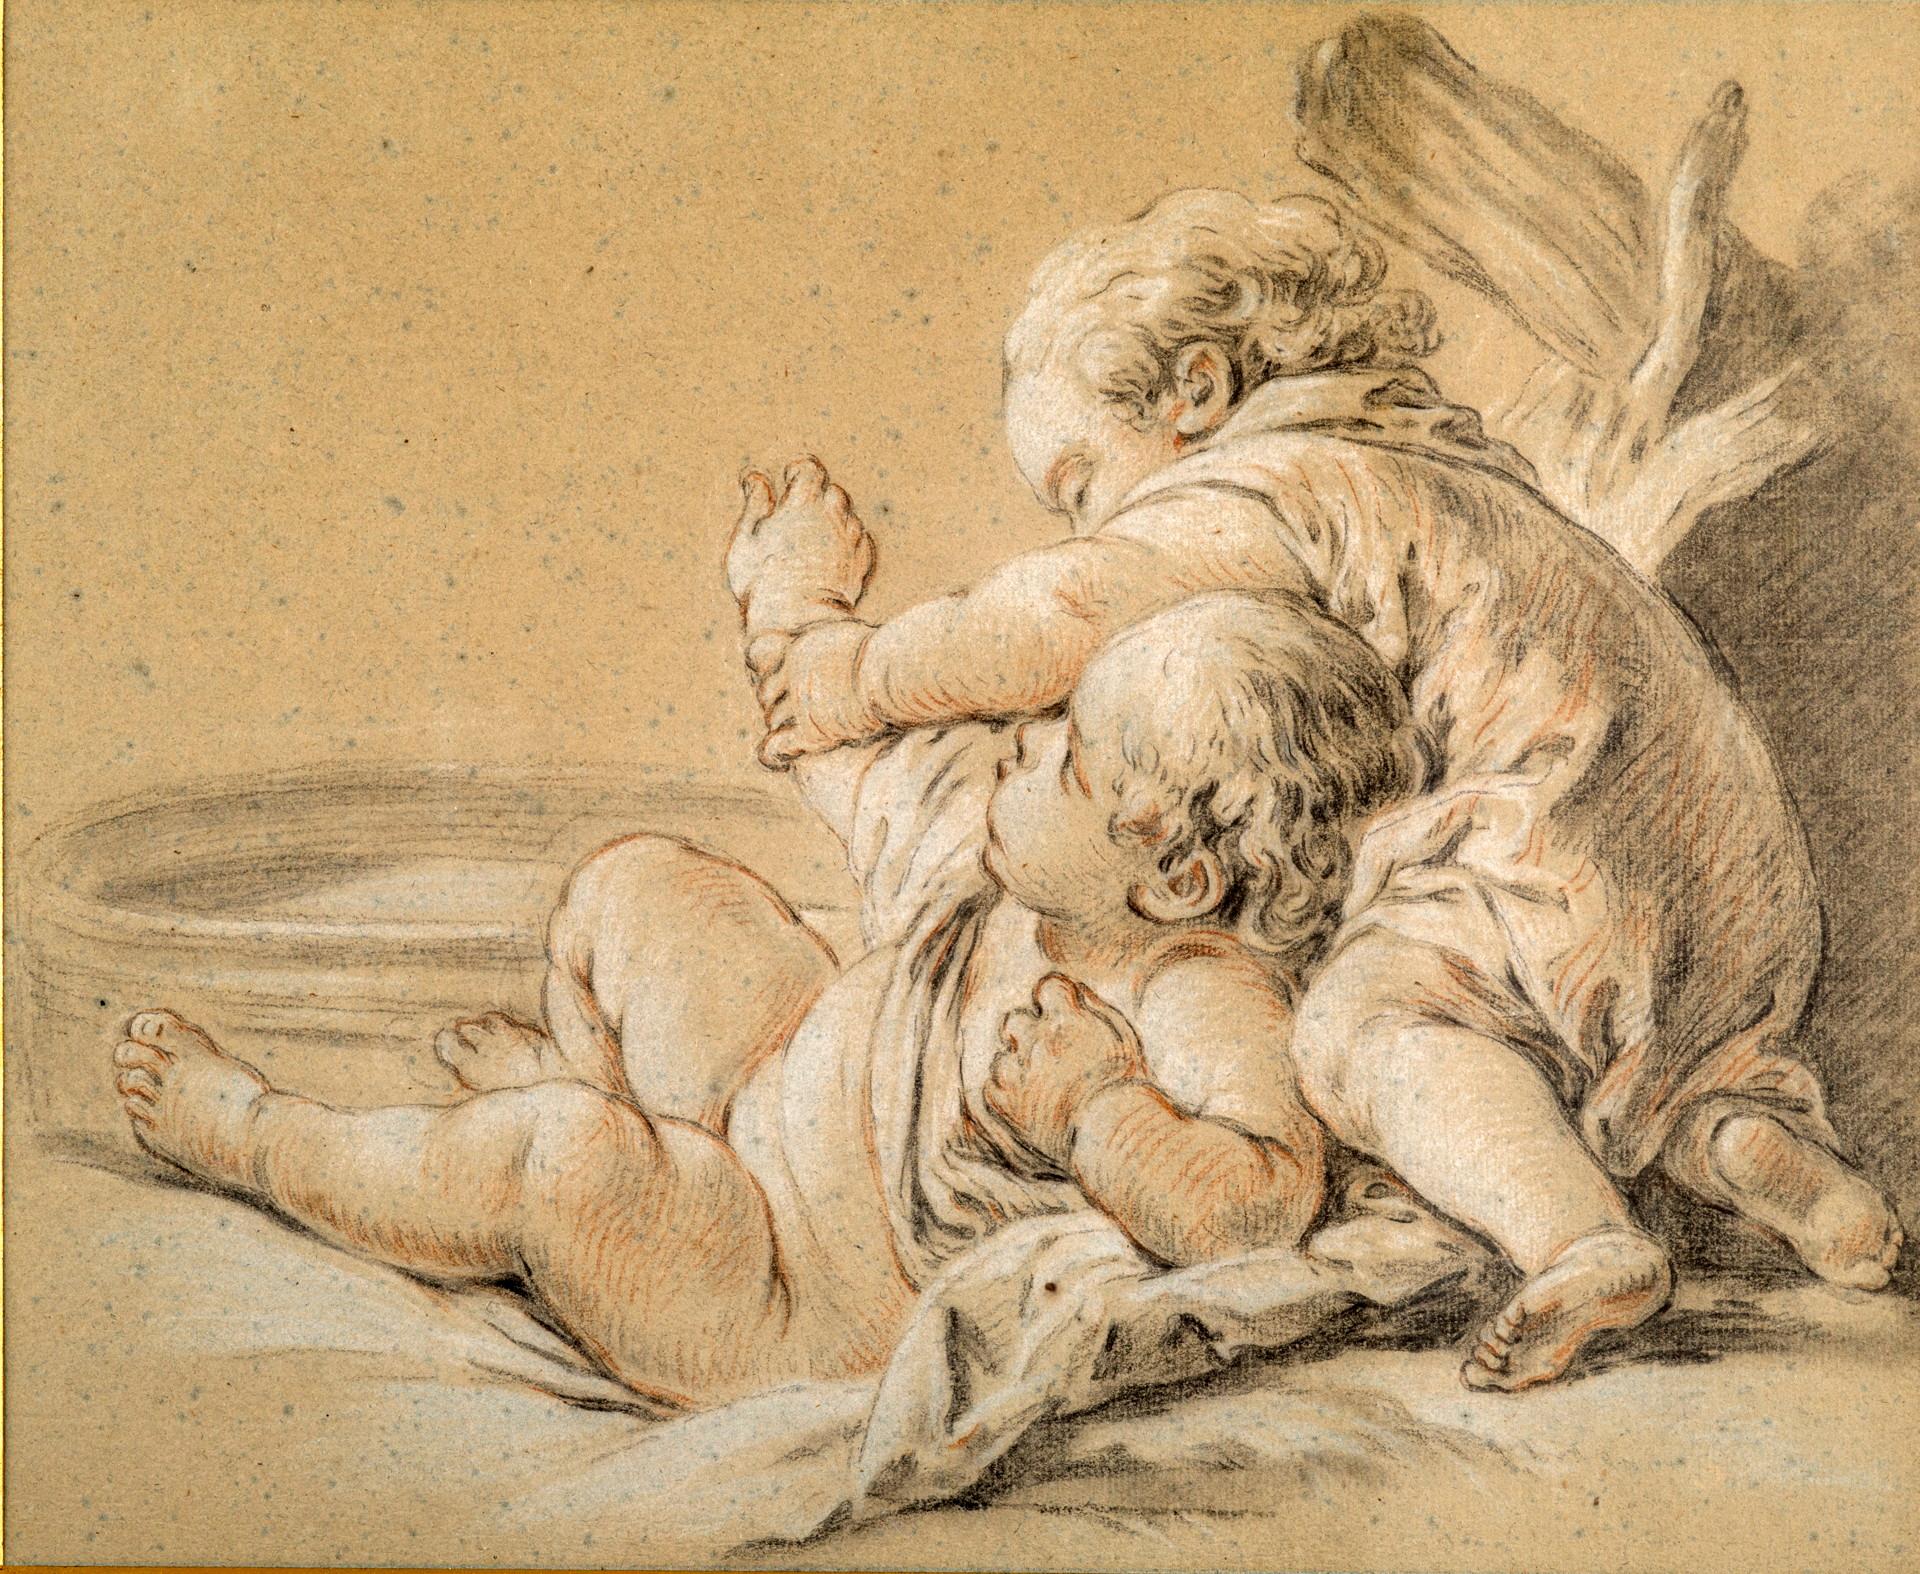 Drawing of children playing besides a basin of water. Framed in a Louis XVI giltwood frame. Typical of the style and subjects of Francois Boucher.
Chalk and pencil on paper.